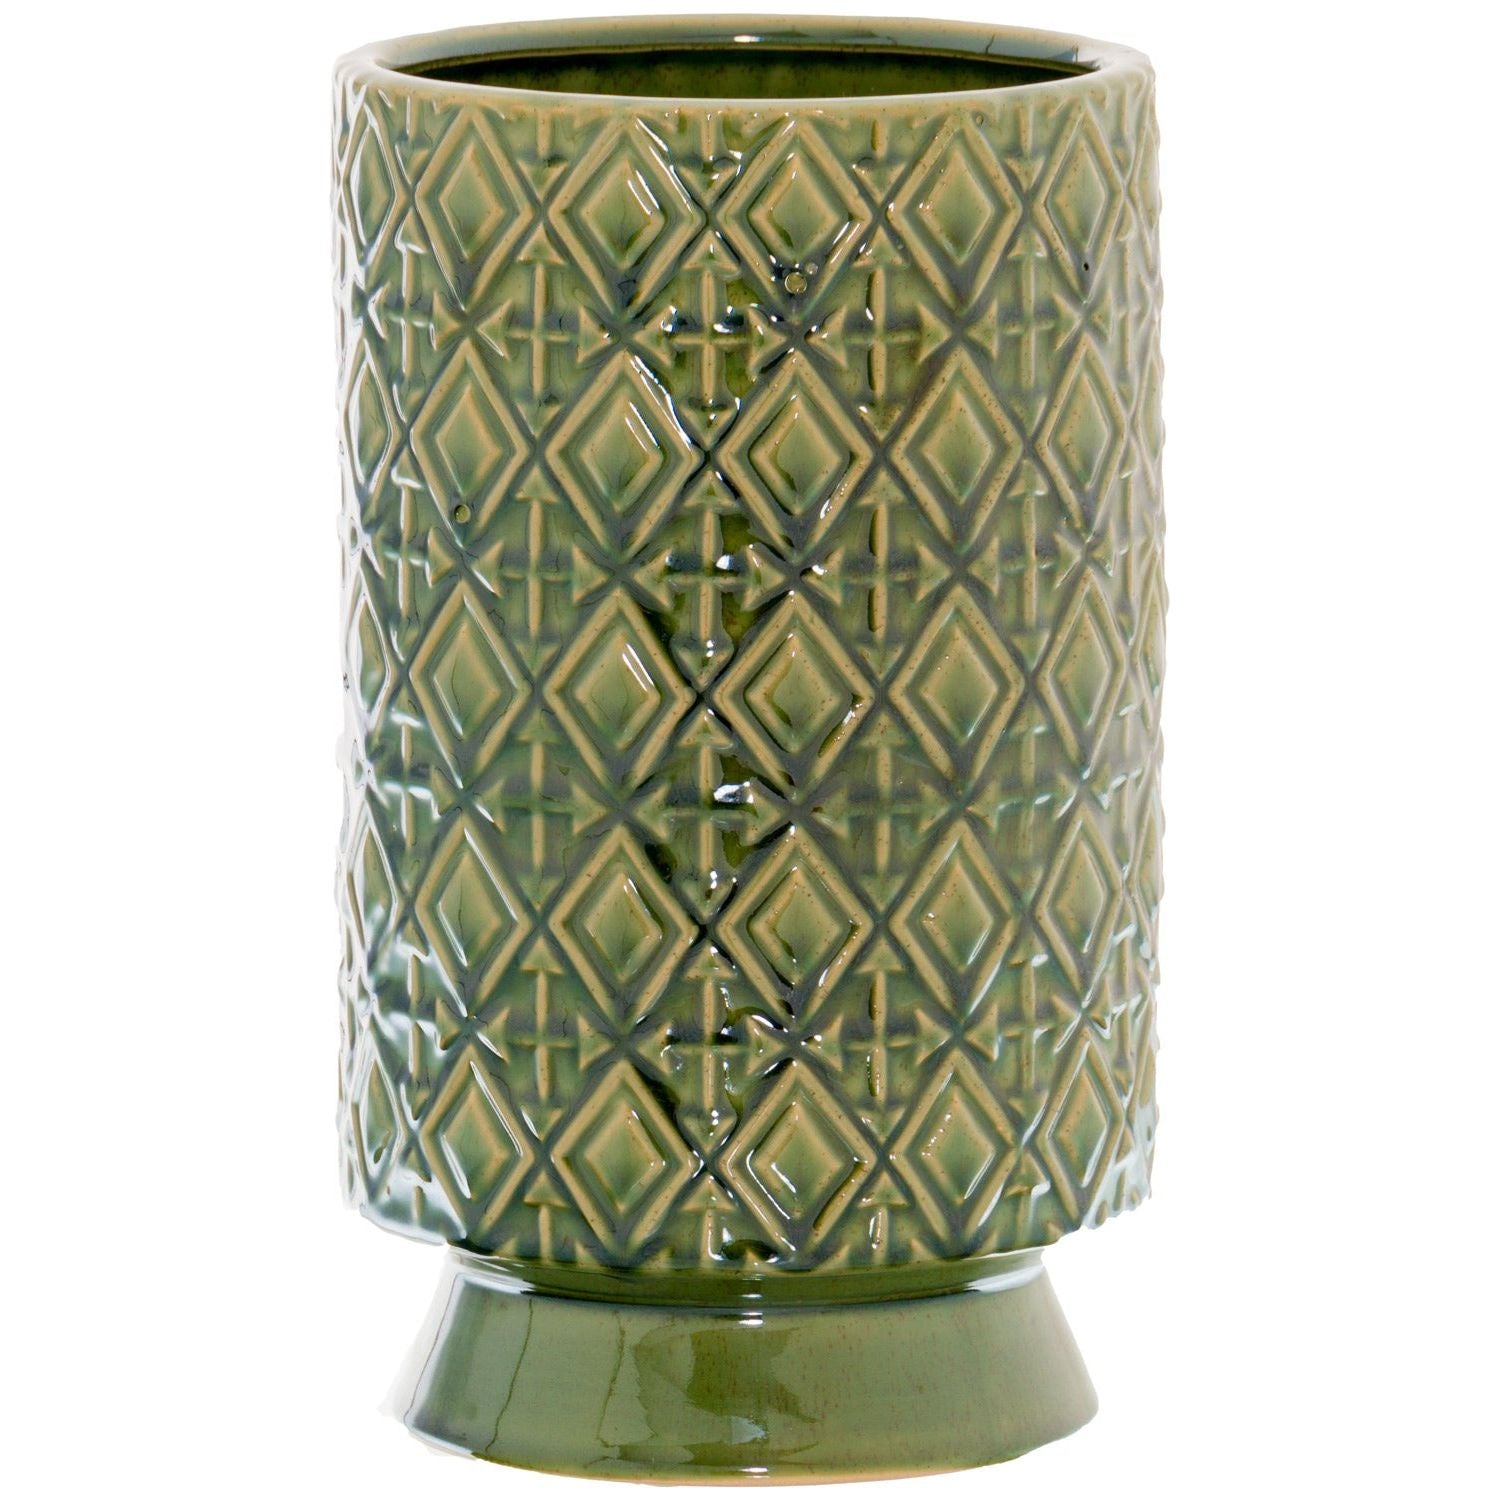 Seville Collection Olive Paragon Vase - Ashton and Finch